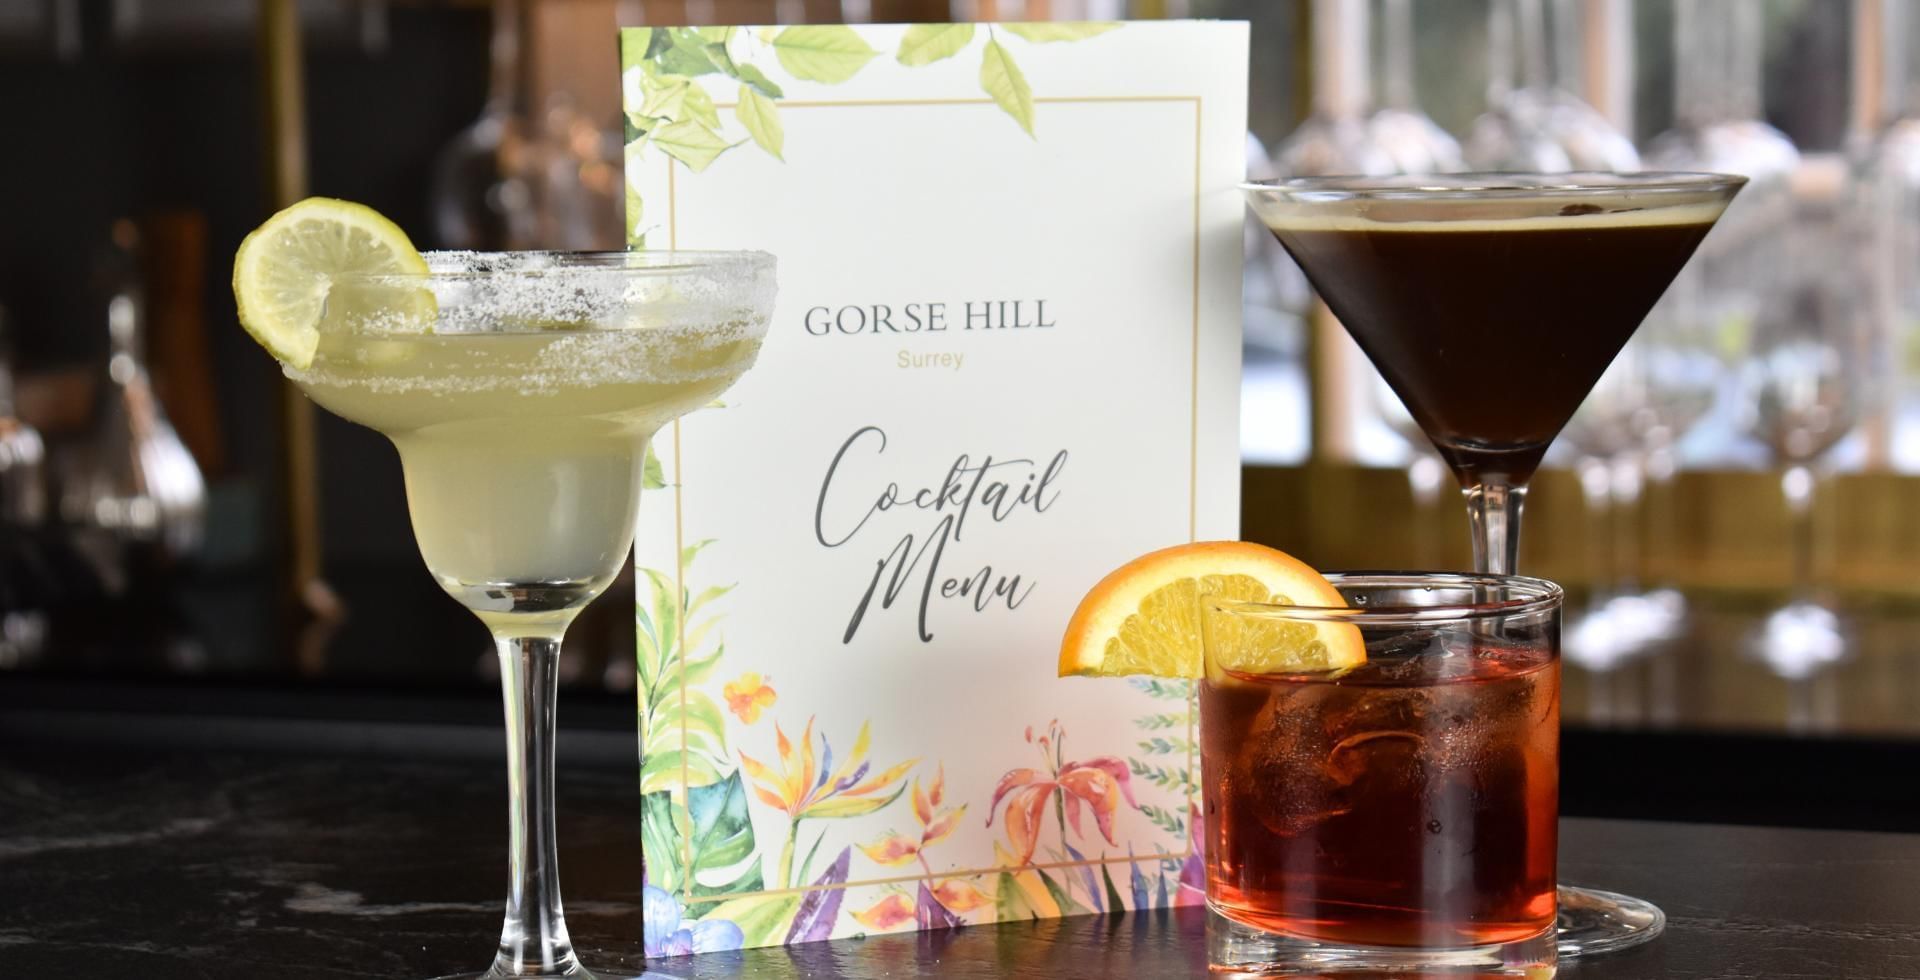  cocktail menu with cocktails by it at gorse hill in woking